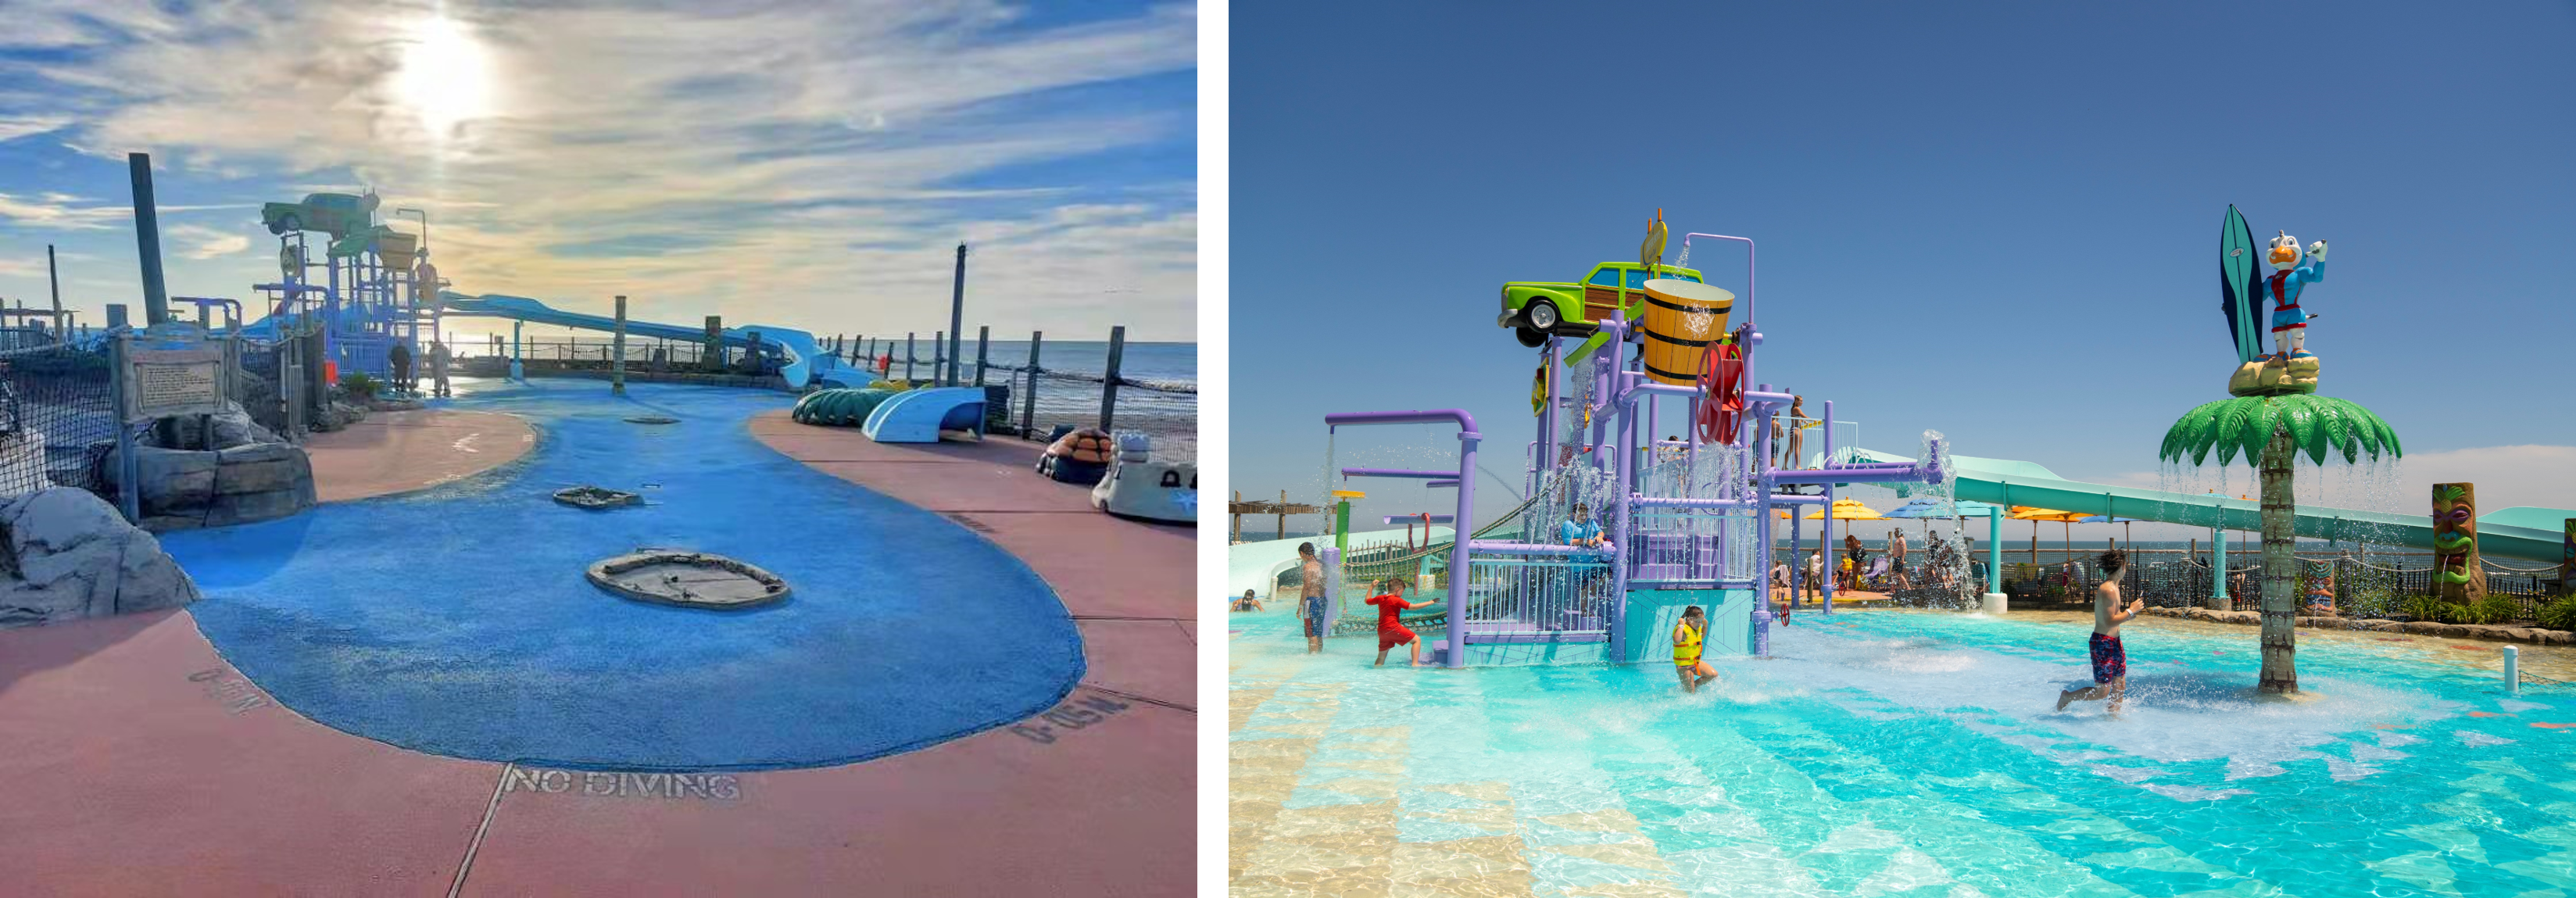 Comparison picture before and after new flooring system addition at water park